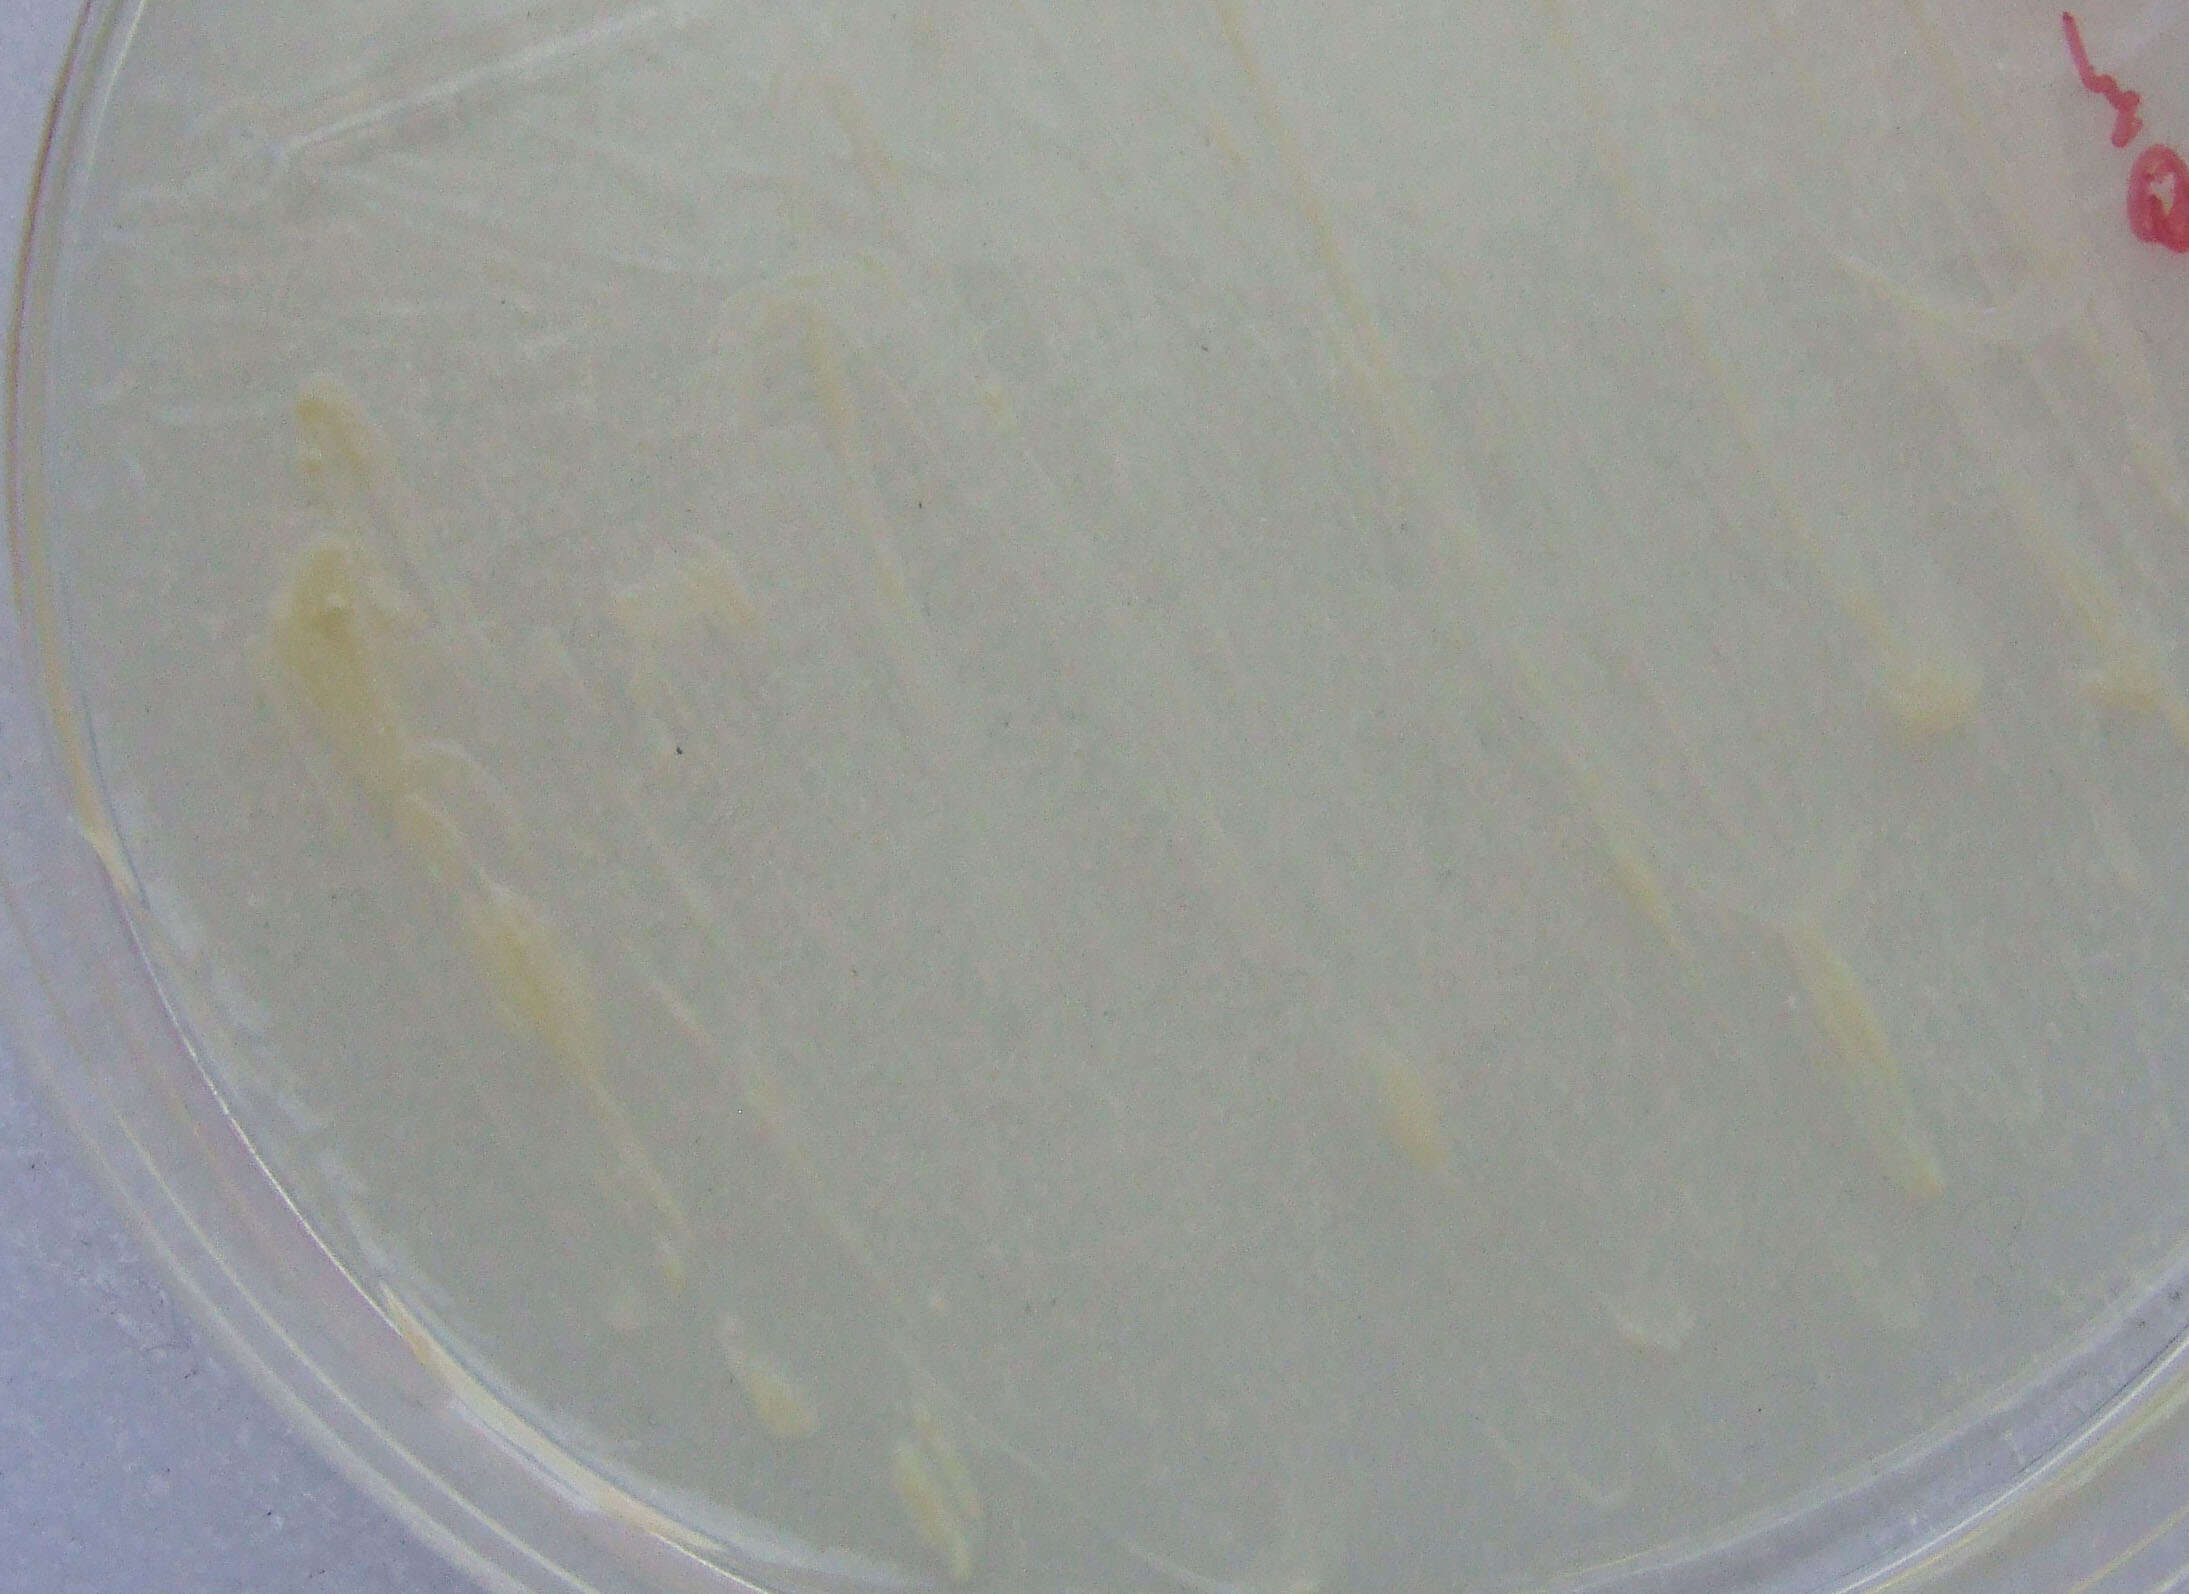 Image of Mycobacteroides abscessus